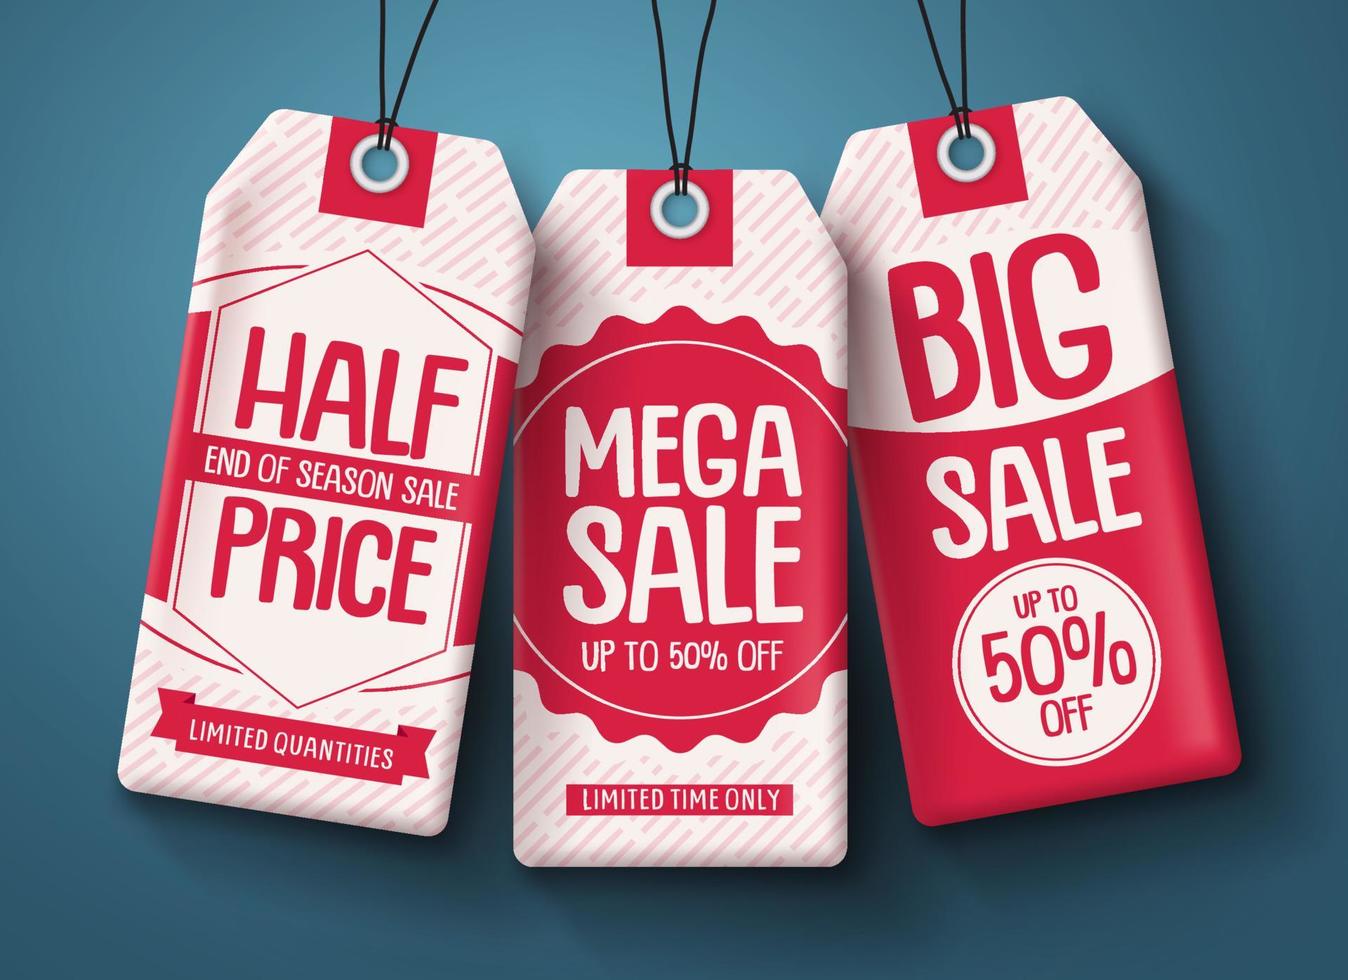 Sale tags vector set. White paper price tags with mega sale and discount text in red hanging for end of season retail shopping promotion. Vector illustration.